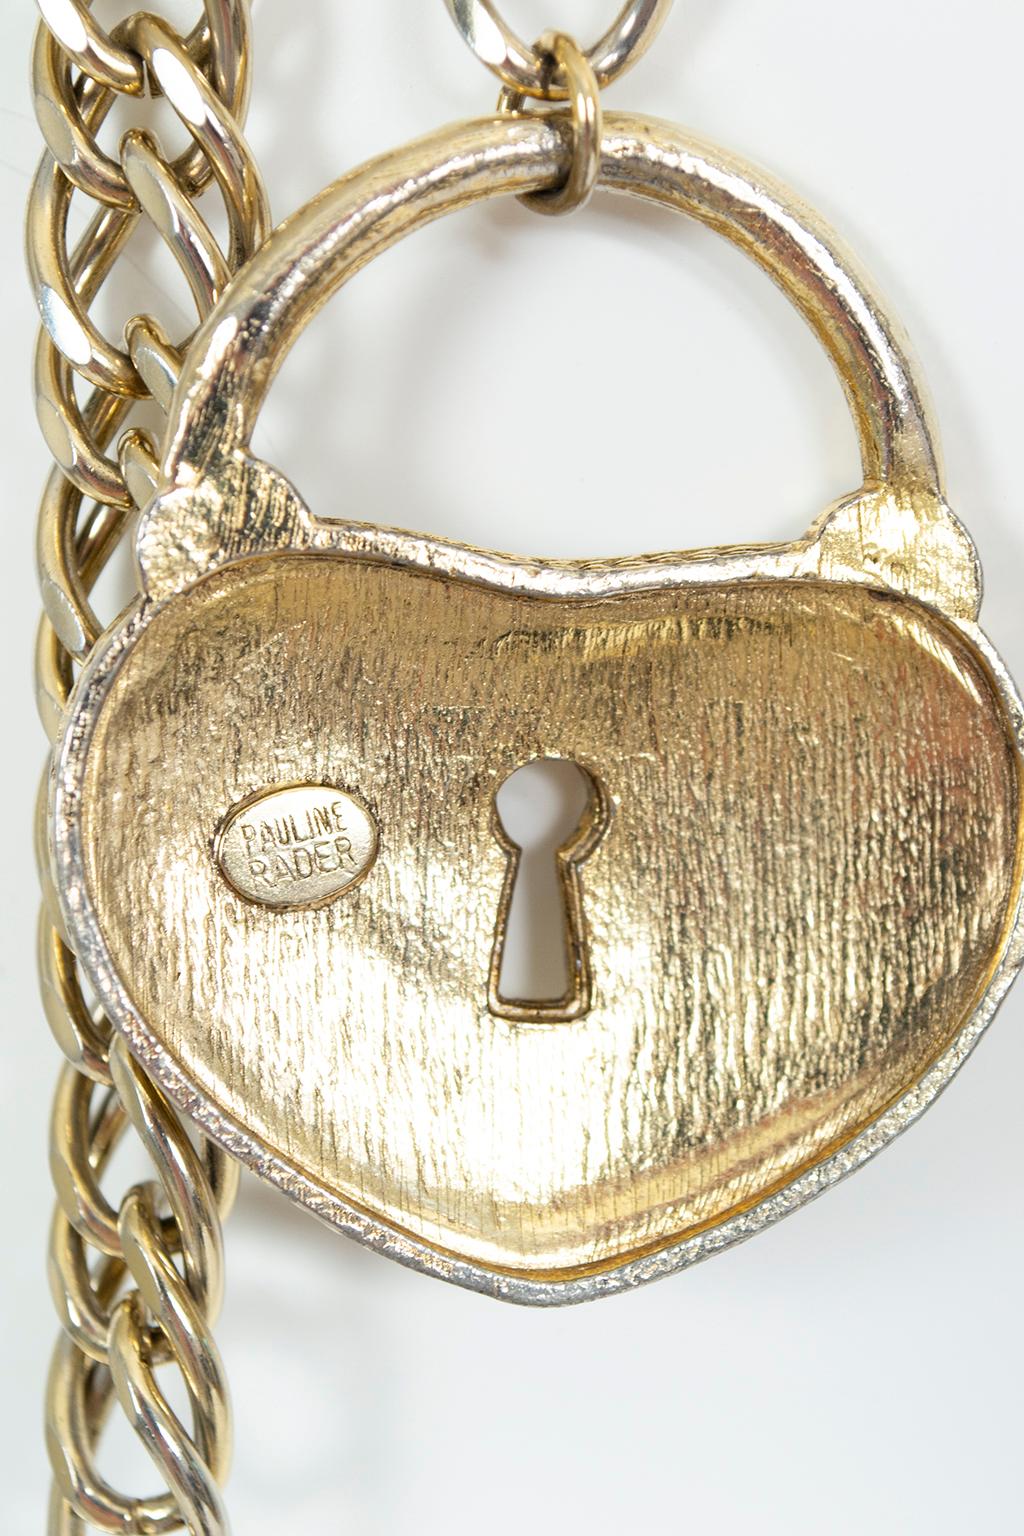 Pauline Rader Gold Lock and Key to My Heart Chain Belt Necklace – XS-S, 1960s For Sale 6